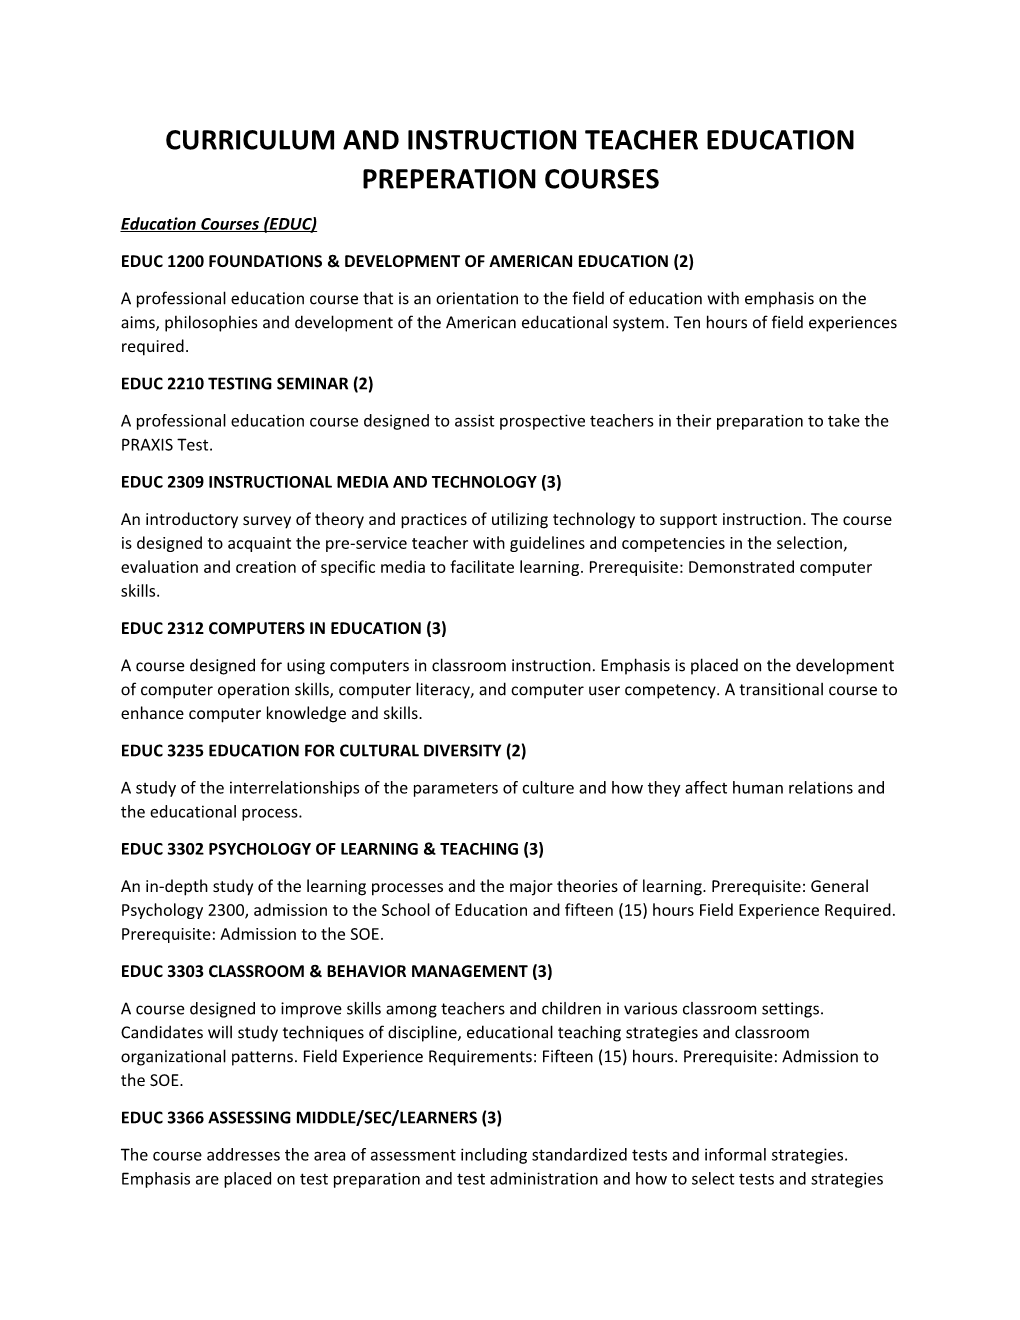 Curriculum and Instruction Teacher Education Preperation Courses